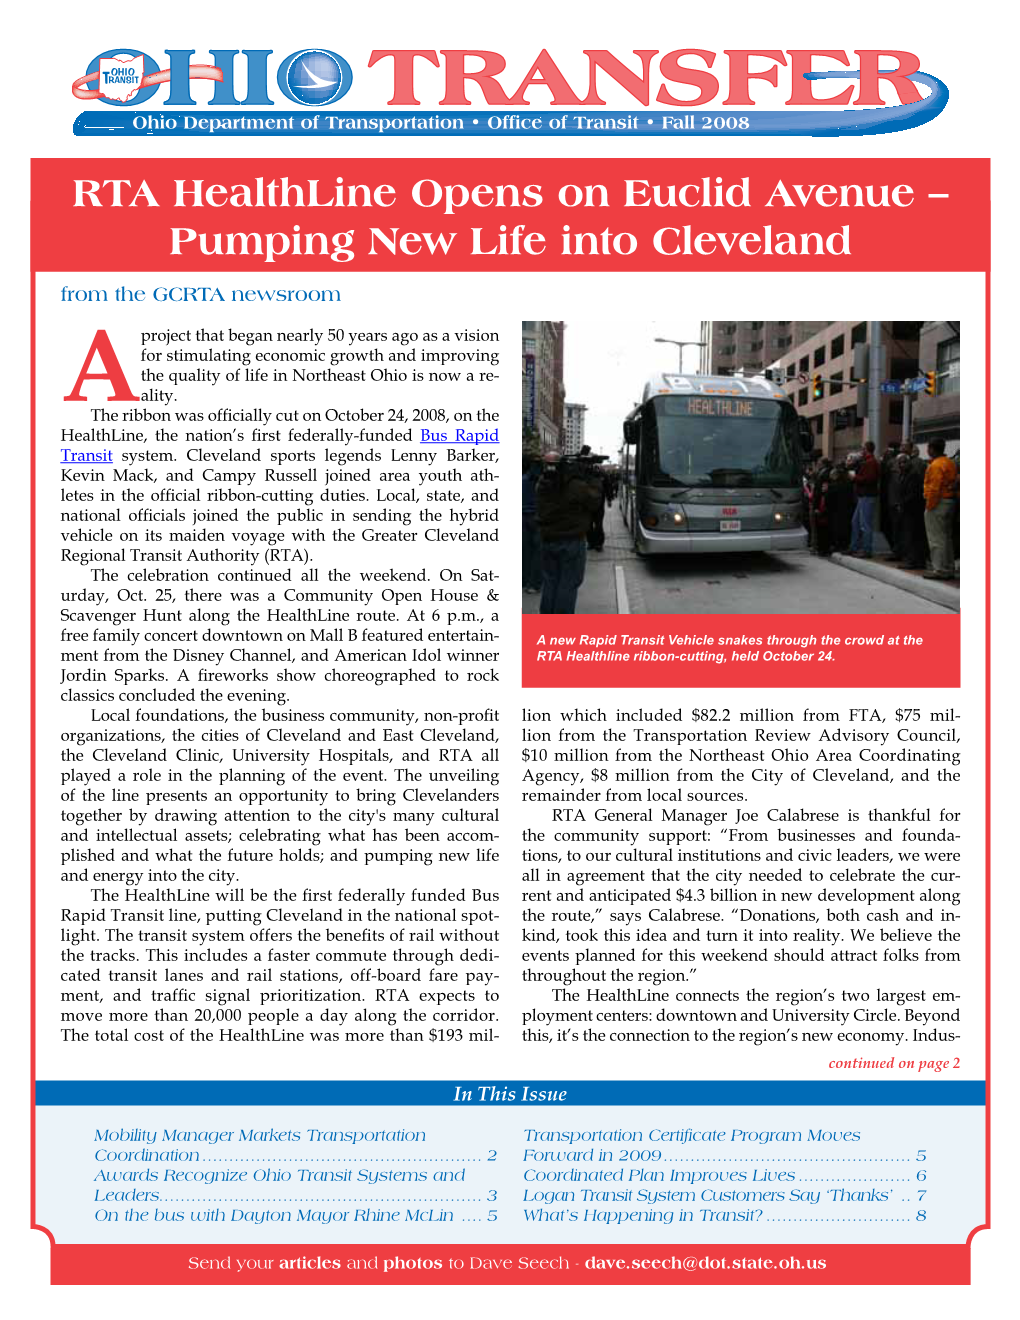 RTA Healthline Opens on Euclid Avenue – Pumping New Life Into Cleveland from the GCRTA Newsroom